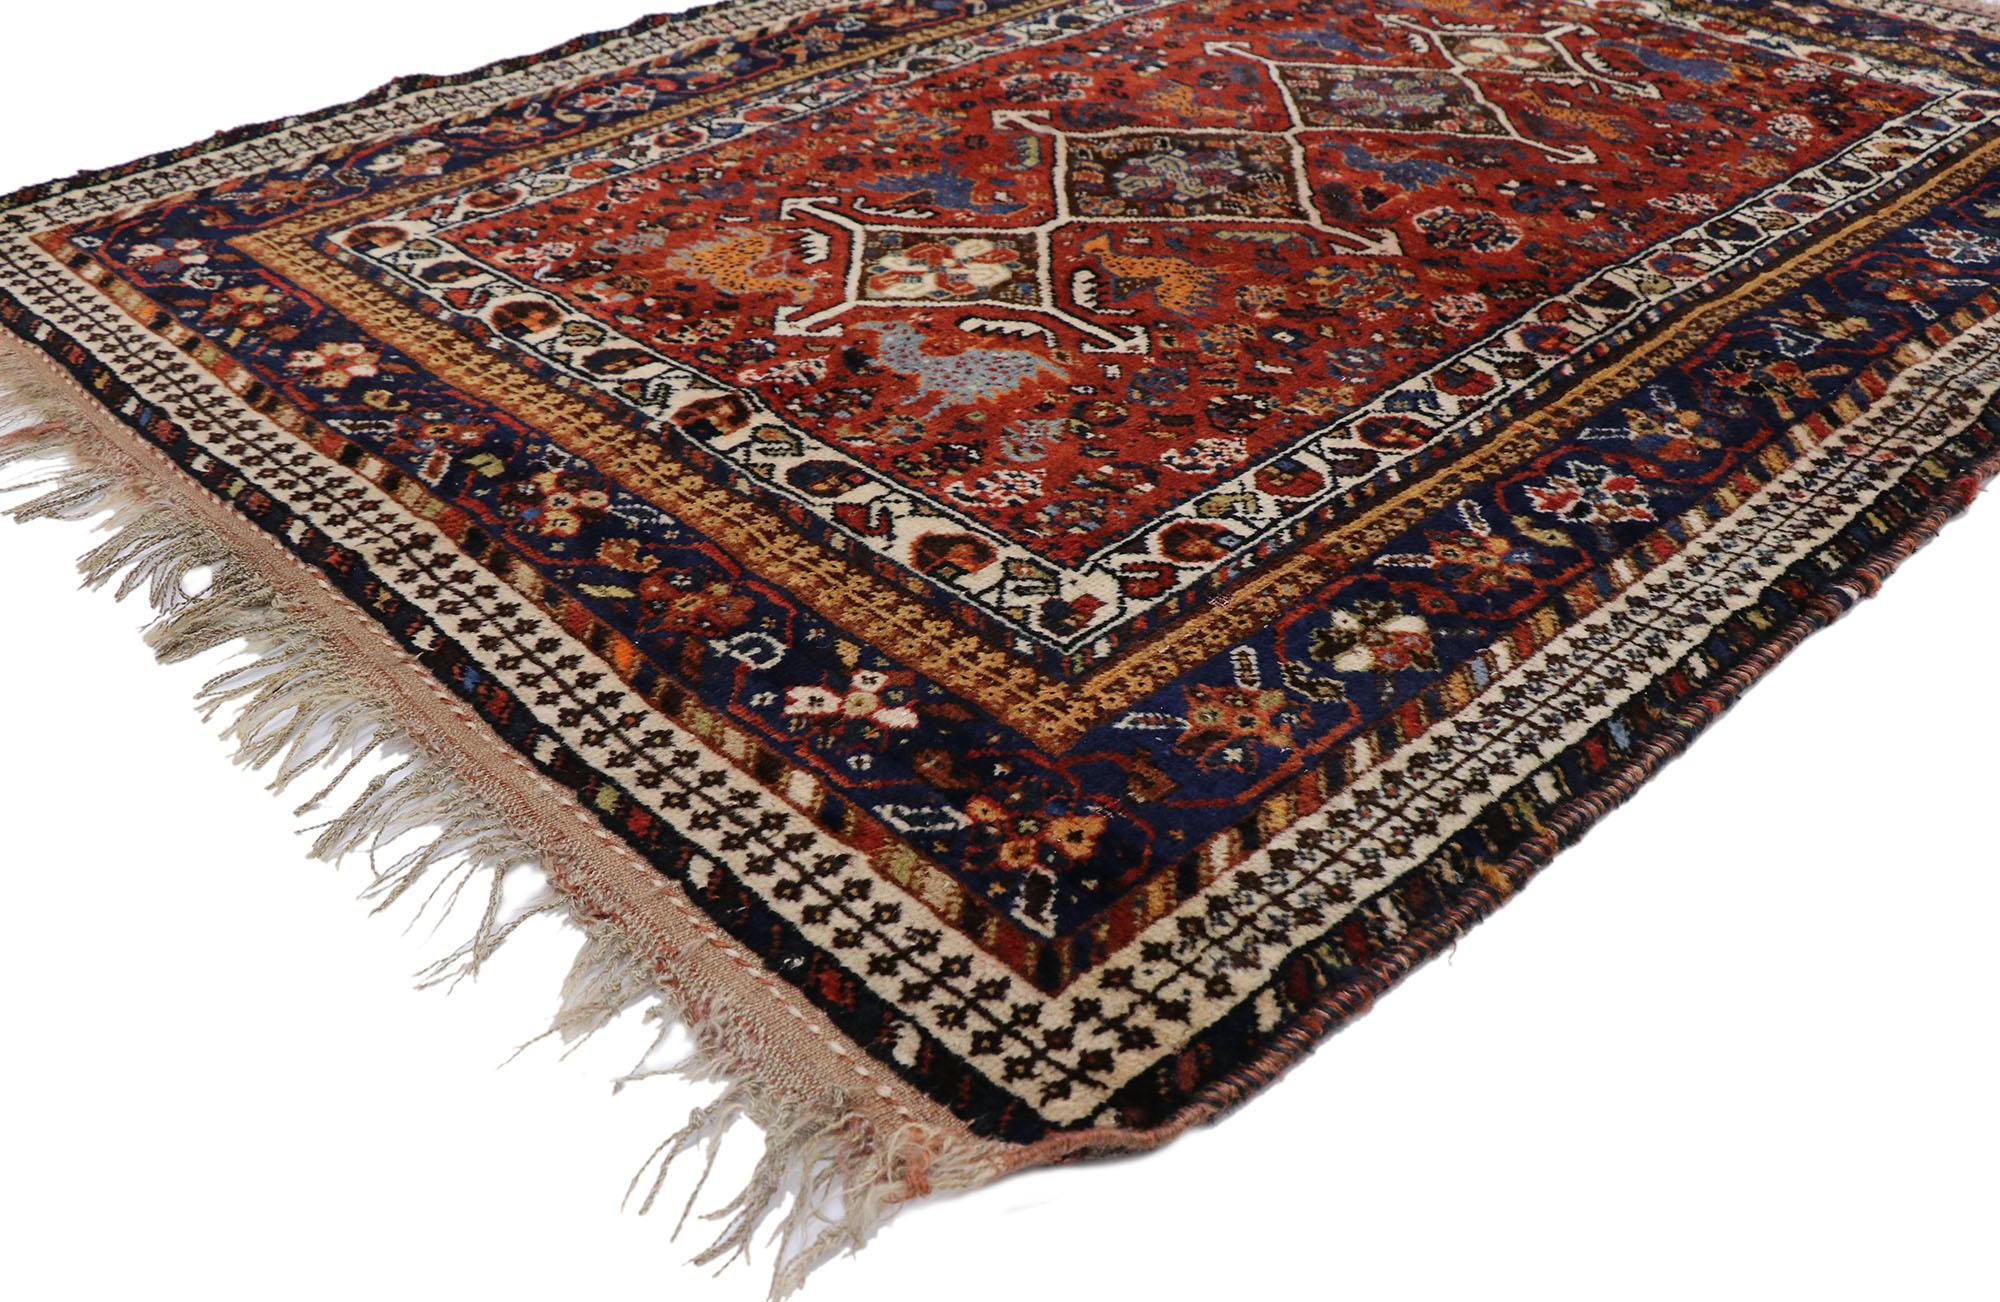 78025 vintage Persian Shiraz rug with Tribal style 04'01 x 05'07. Embodying tribal style and understated elegance with rustic sensibility, this hand knotted wool vintage Persian Shiraz rug is a captivating vision of woven beauty. A lozenge pole